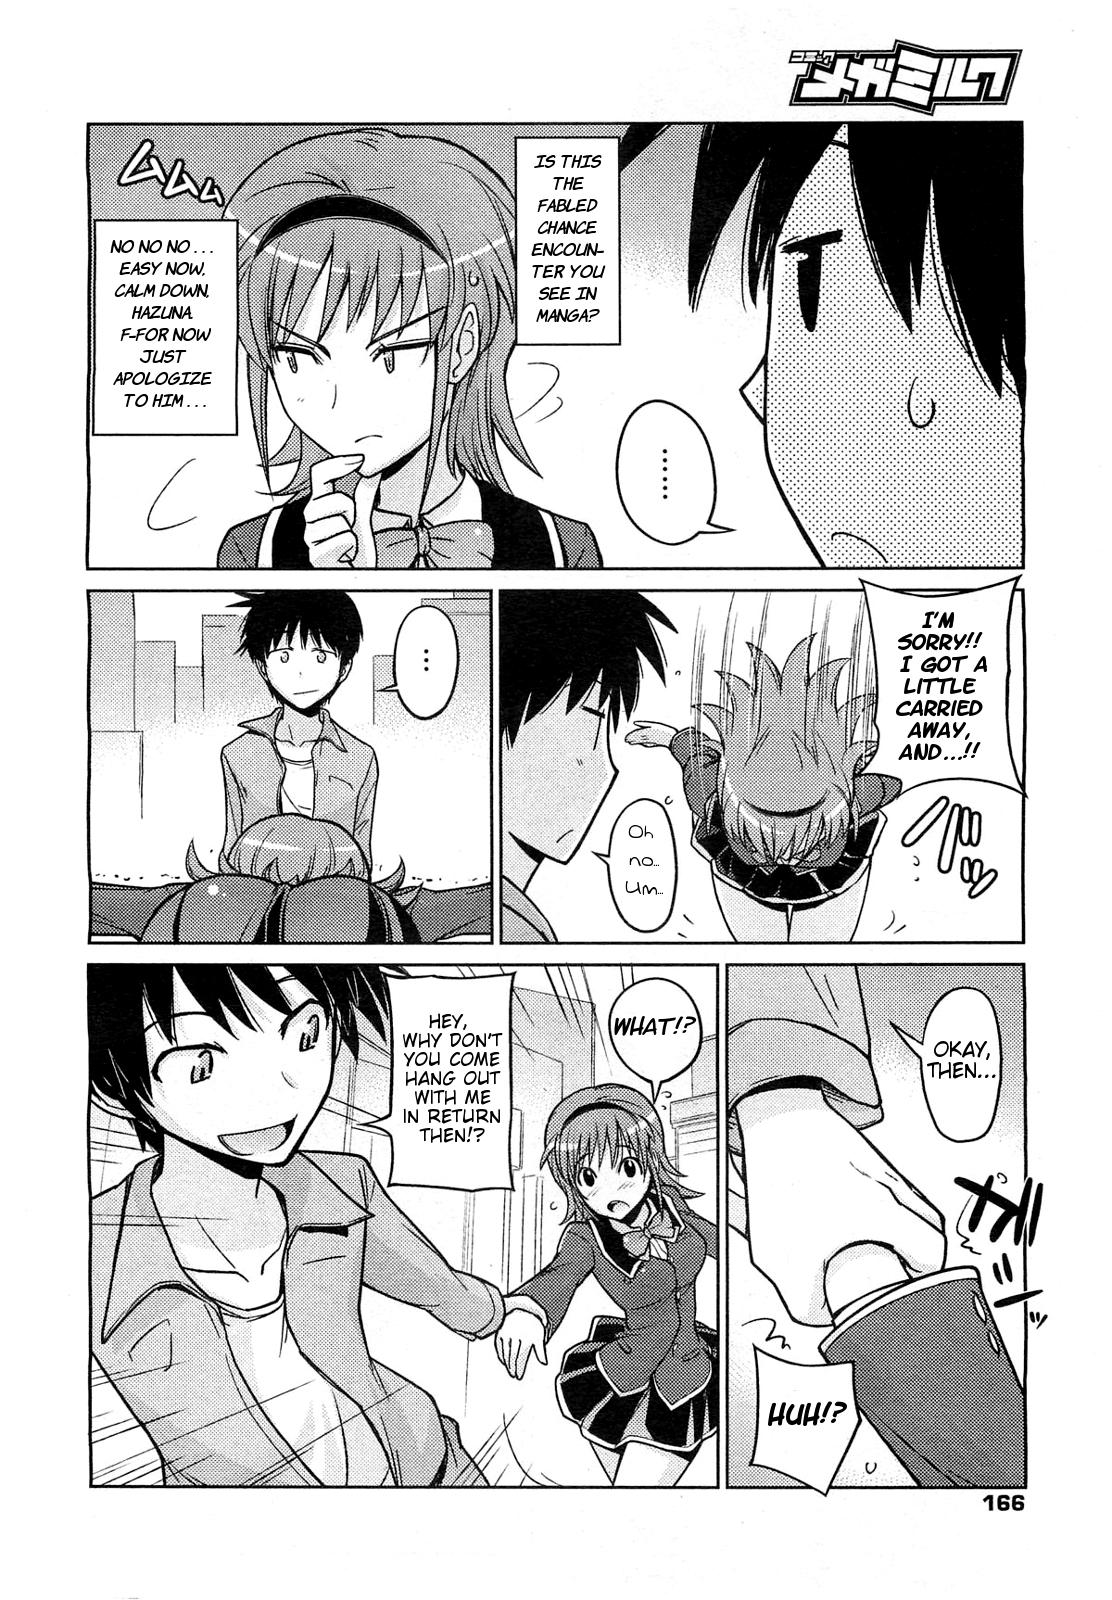 Hot Naked Women [Umiushi] Let's Play With a High School (?) Girl!! [English] =TV+L4K= Tiny Tits - Page 4